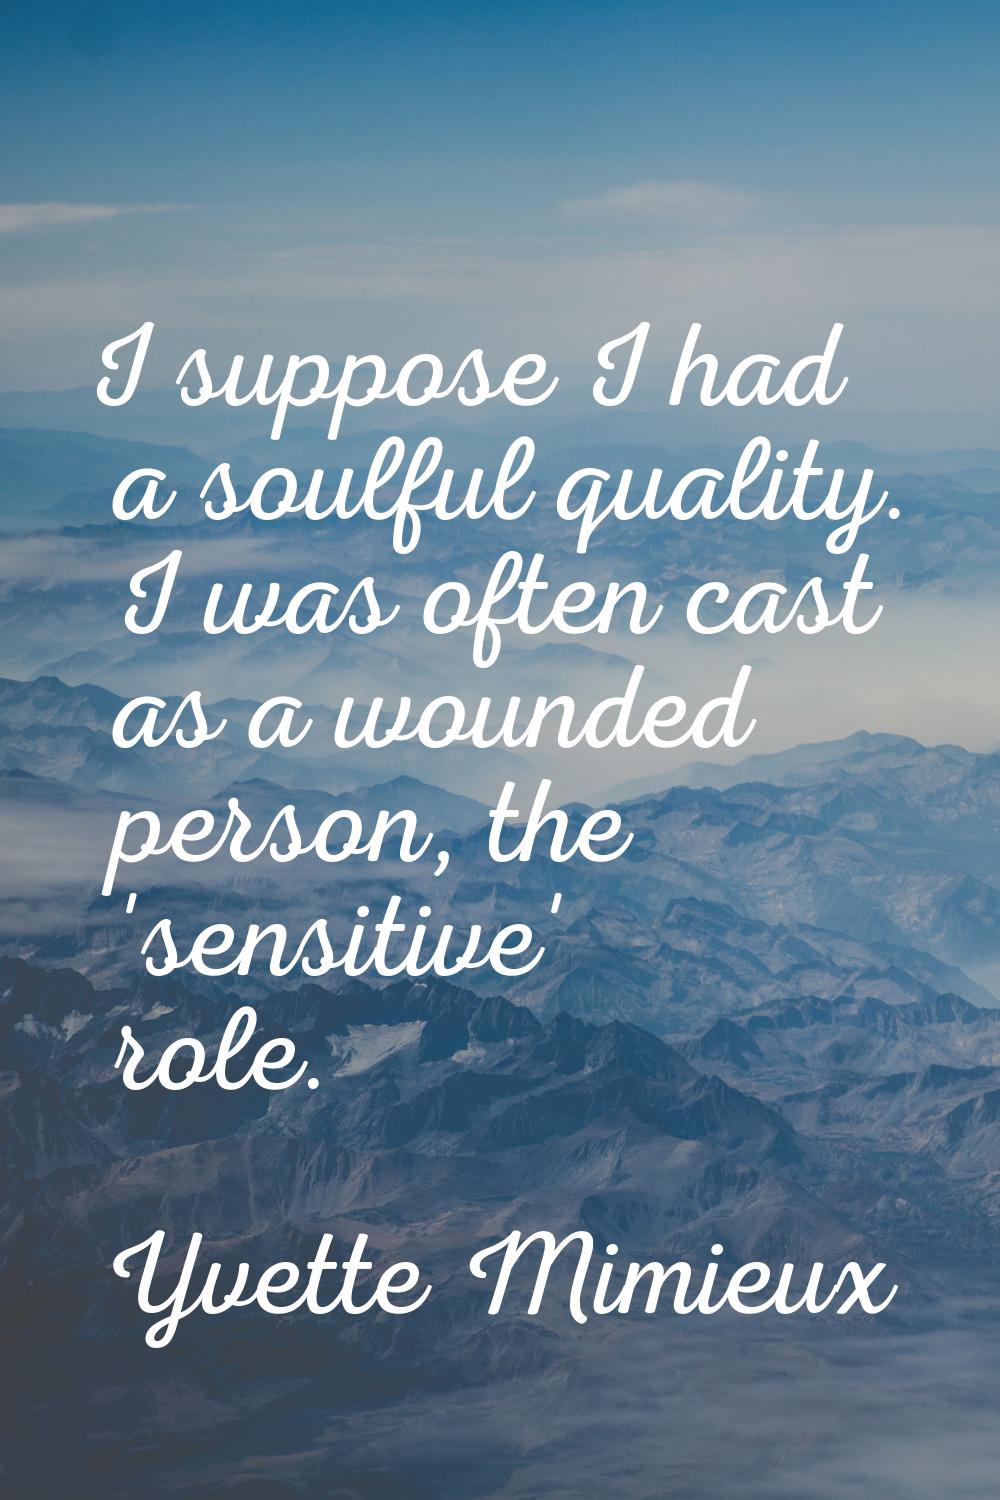 I suppose I had a soulful quality. I was often cast as a wounded person, the 'sensitive' role.